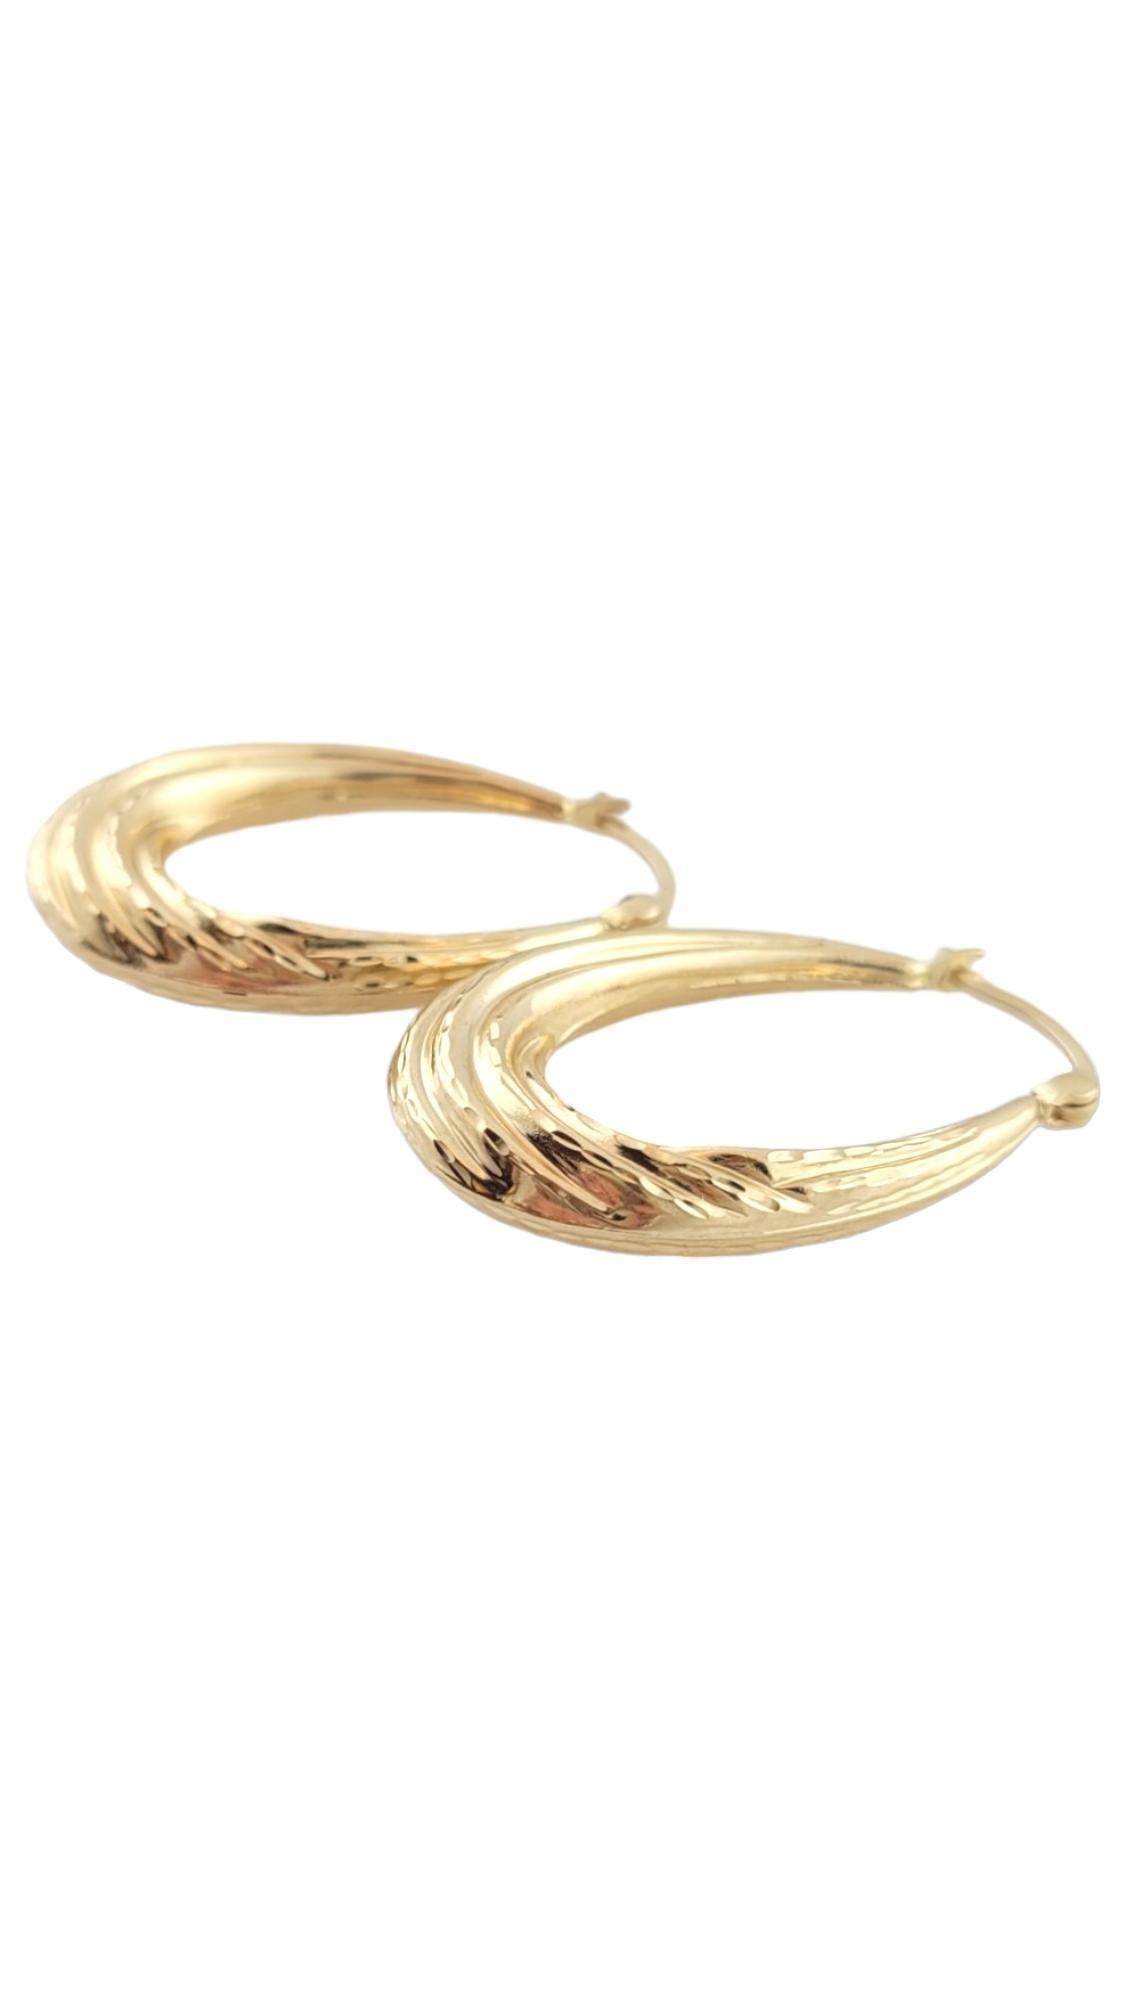 Vintage 14K Yellow Gold Textured Oval Hoop Earrings

This gorgeous set of oval hoop earrings have a beautiful textured finish!

Size: 30.6mm X 20.2mm X 5.2mm

Weight: 1.5 dwt/ 2.4 g

Hallmark: SLC 14K

Very good condition, professionally